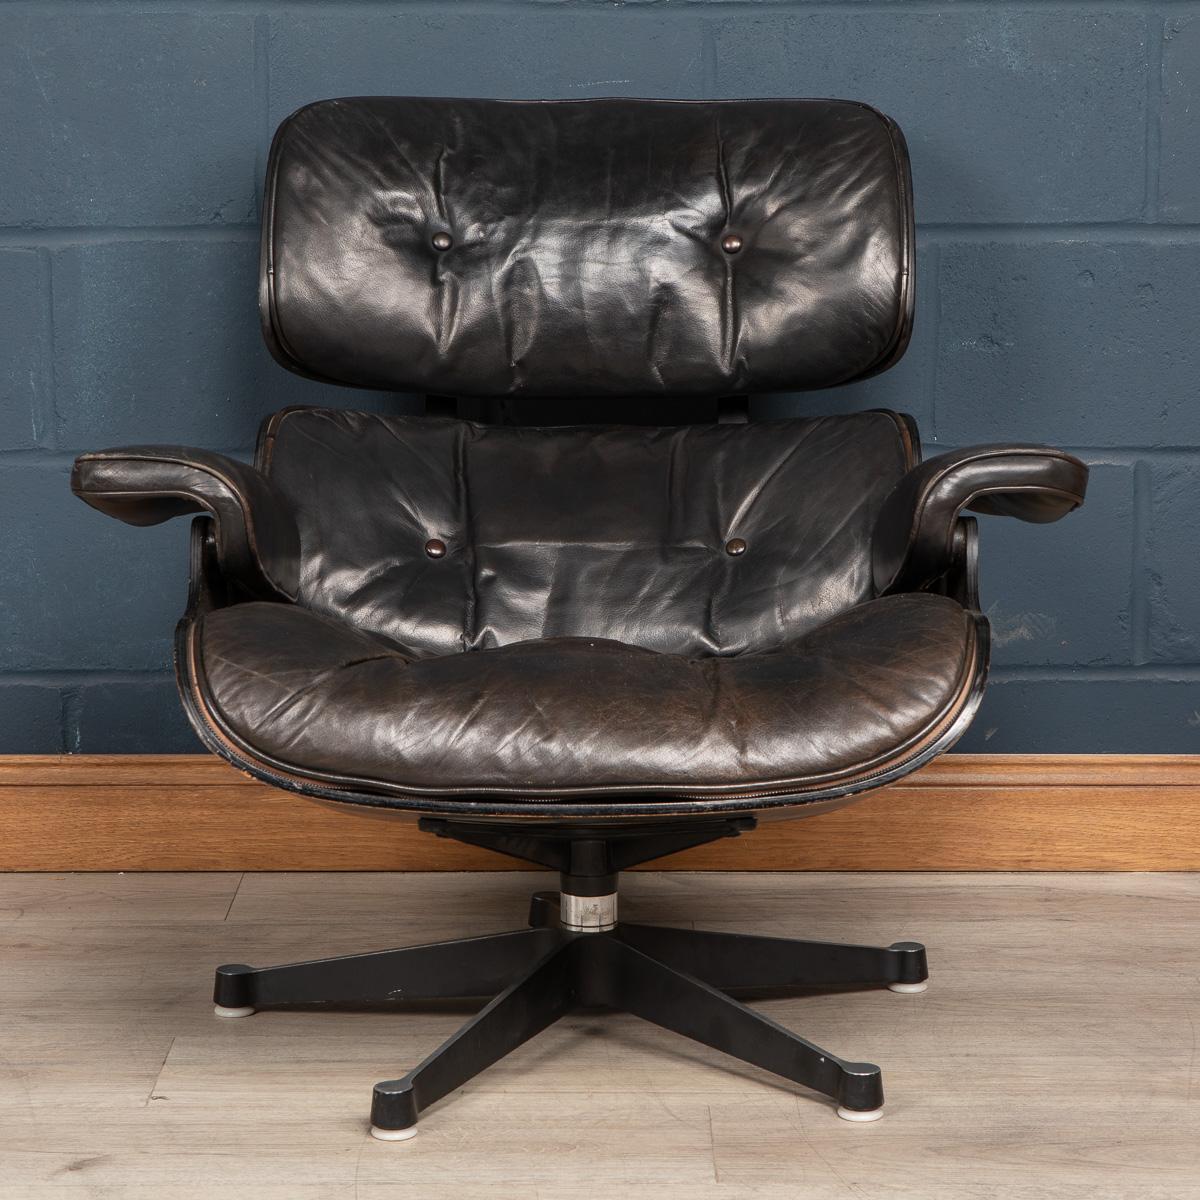 The Eames lounge chair and ottoman are furnishings made of molded plywood and leather, designed by Charles and Ray Eames for the Herman Miller furniture company. They are officially titled Eames Lounge and Ottoman and were released in 1956 after